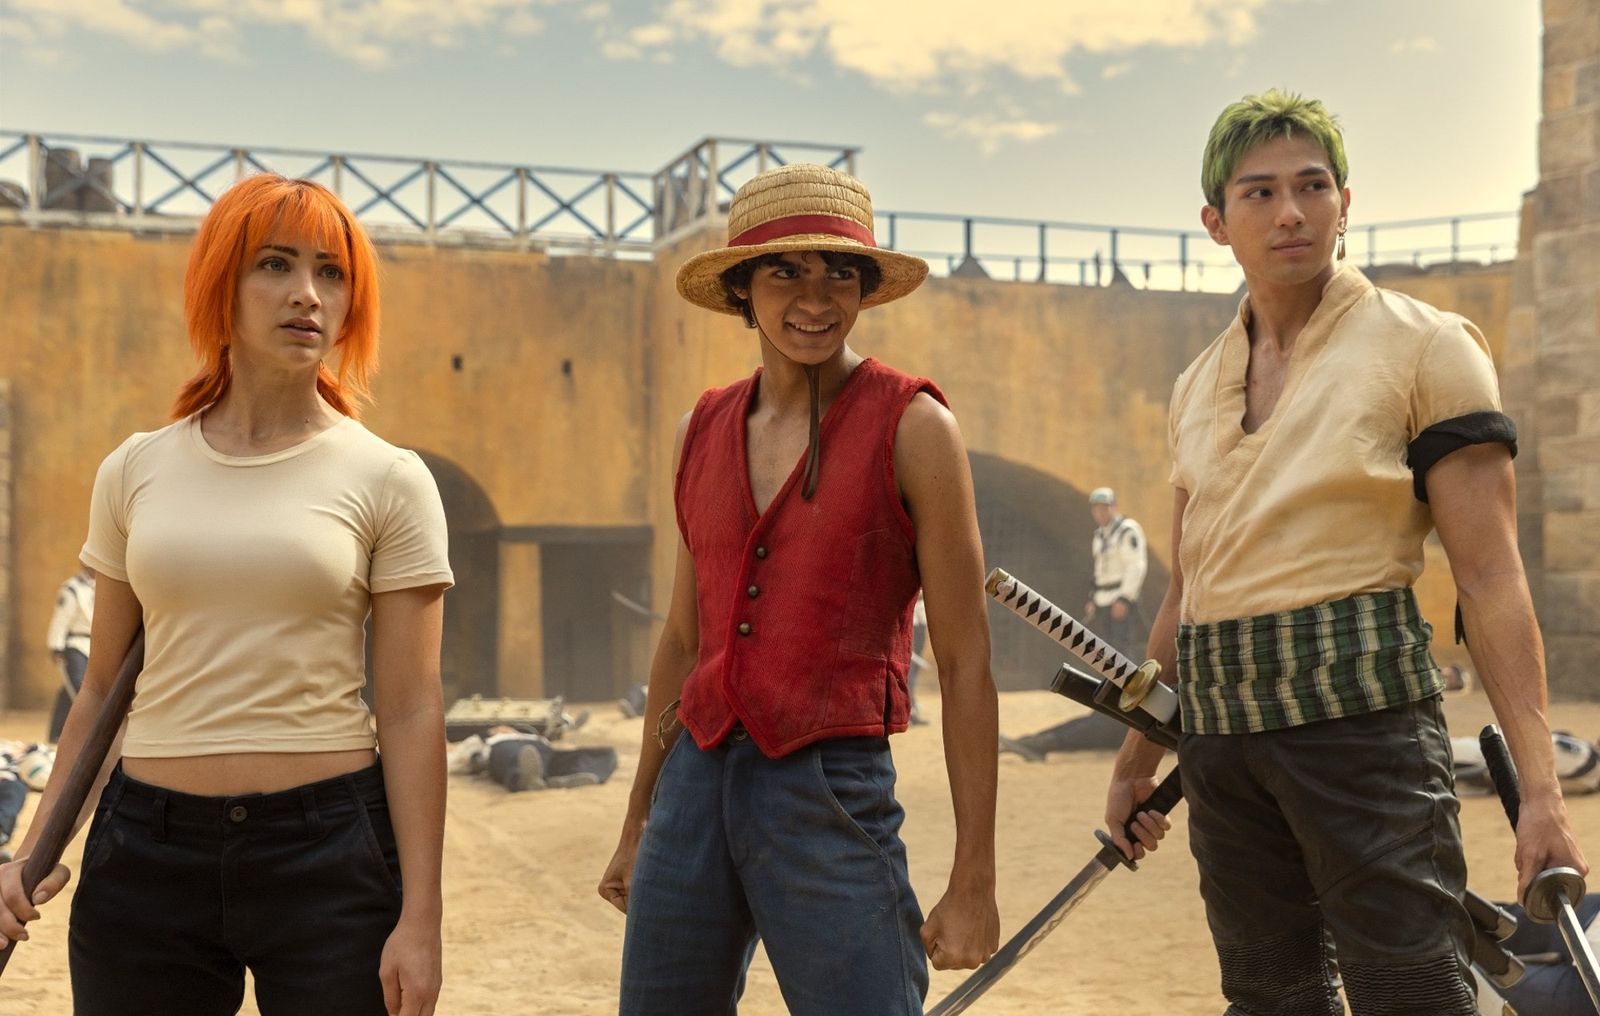 So, Is the One Piece Live-Action Series Worth Watching?